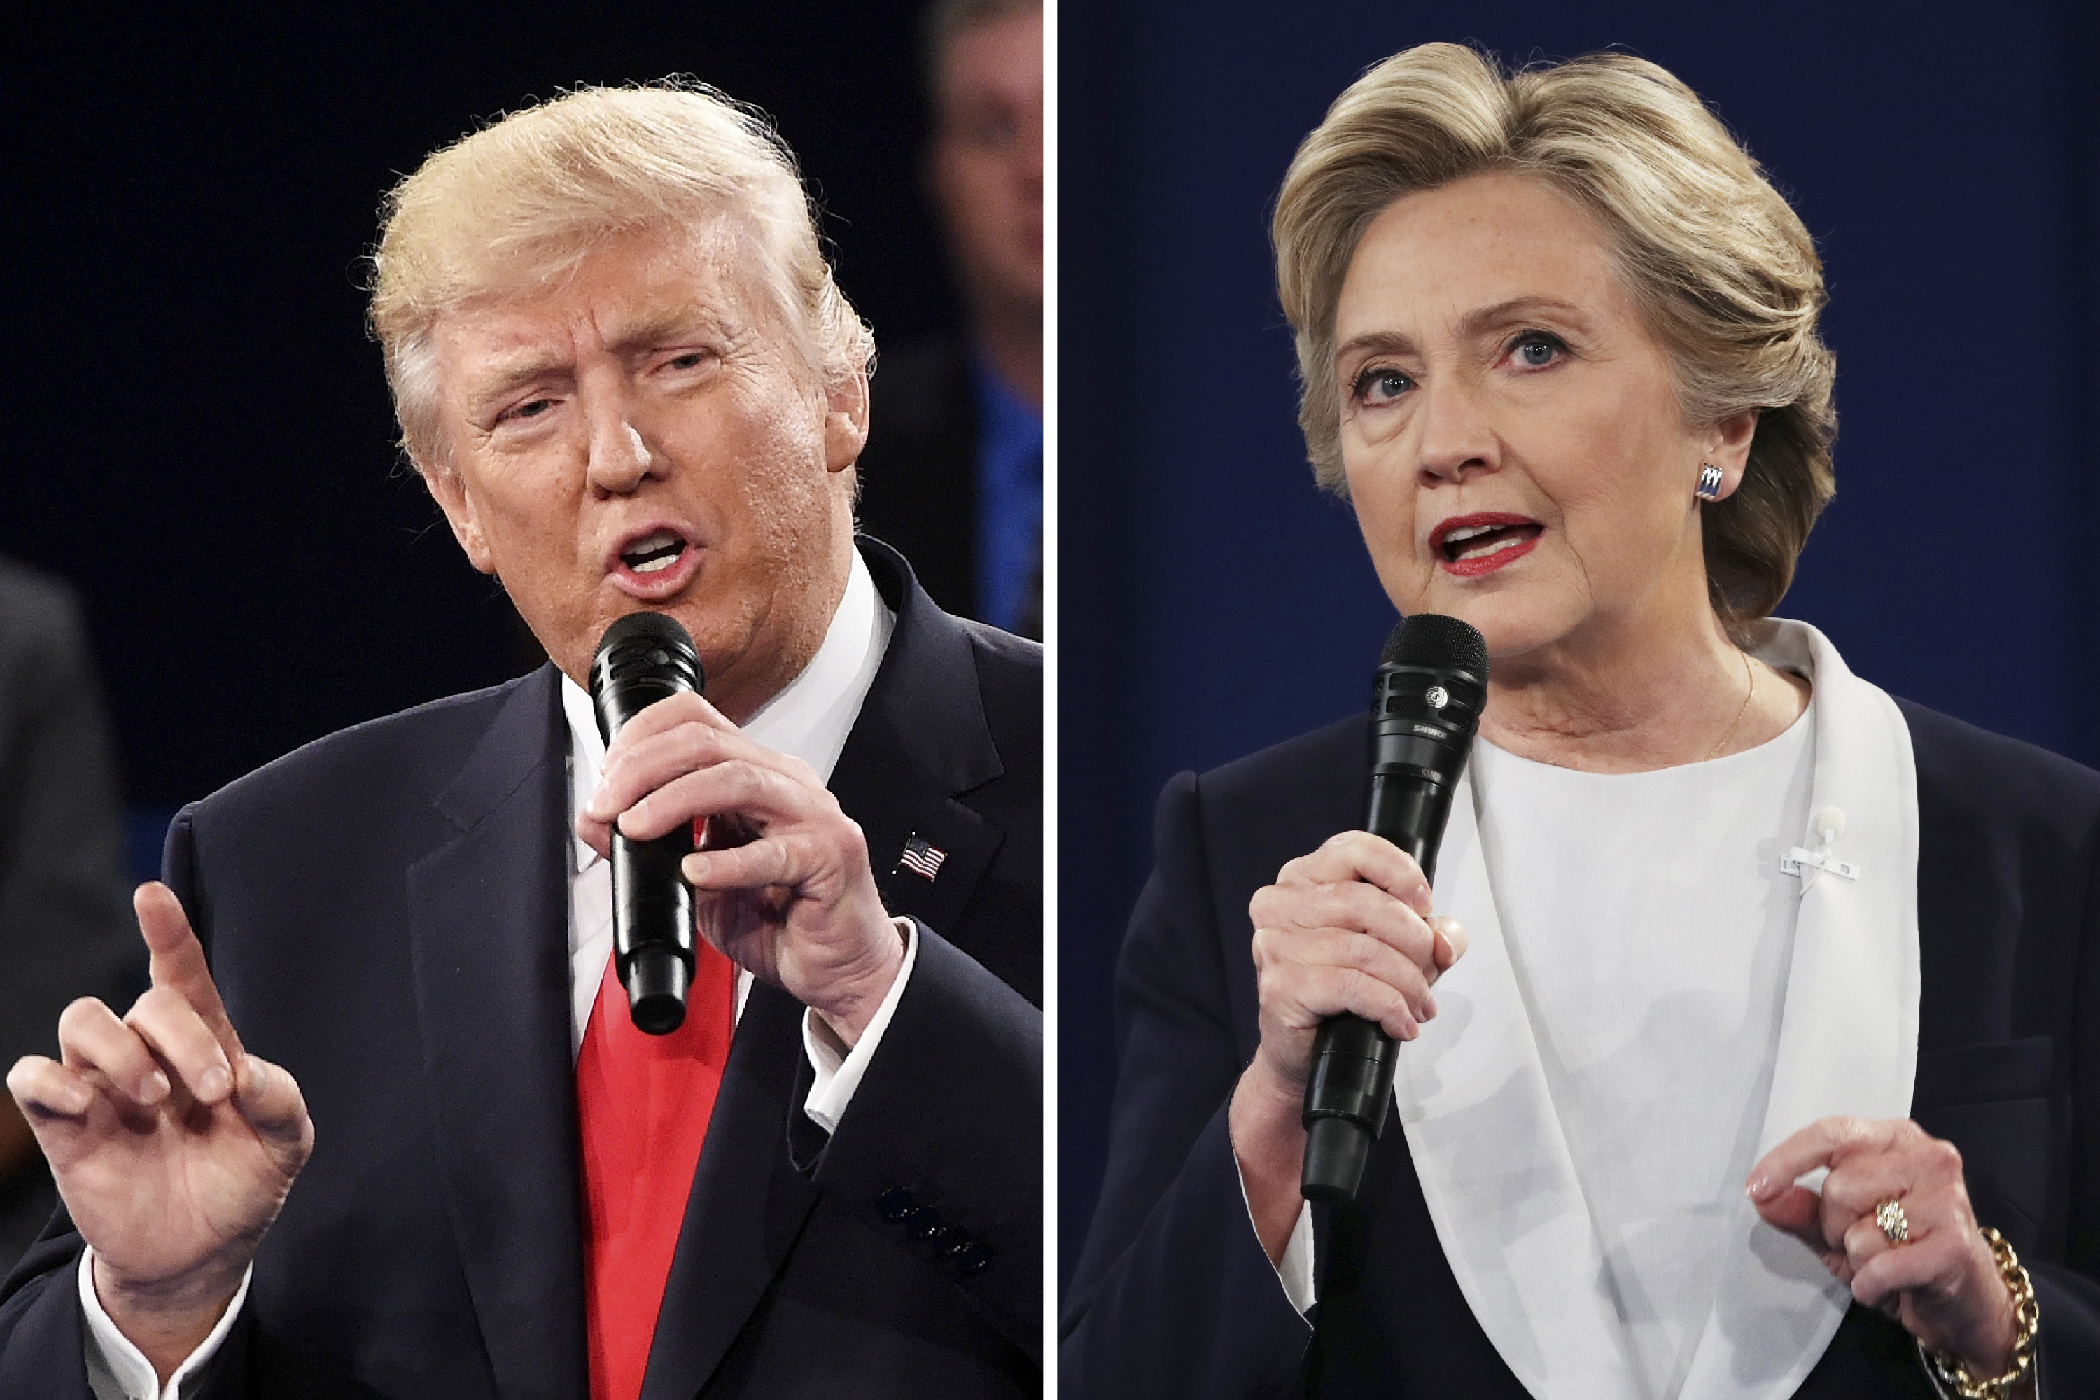 WATCH: Clinton &amp; Trump Talk Health Care and Taxes at the 2nd Presidential Debate